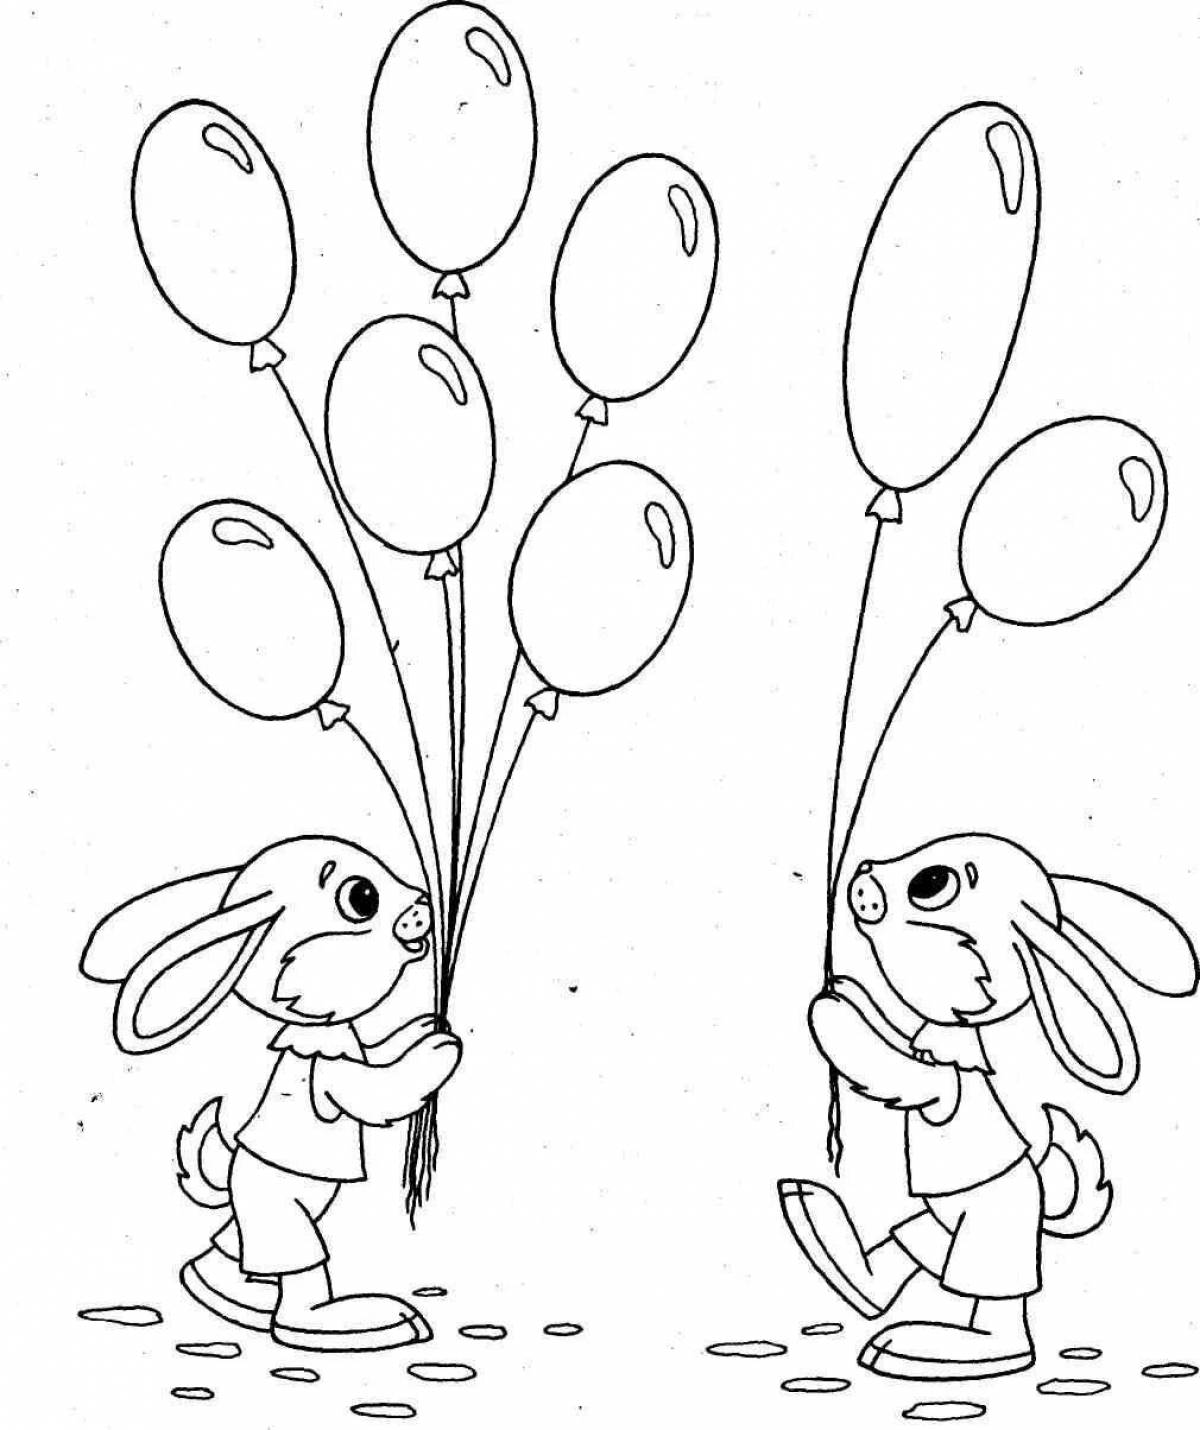 Charming bunny with balloons